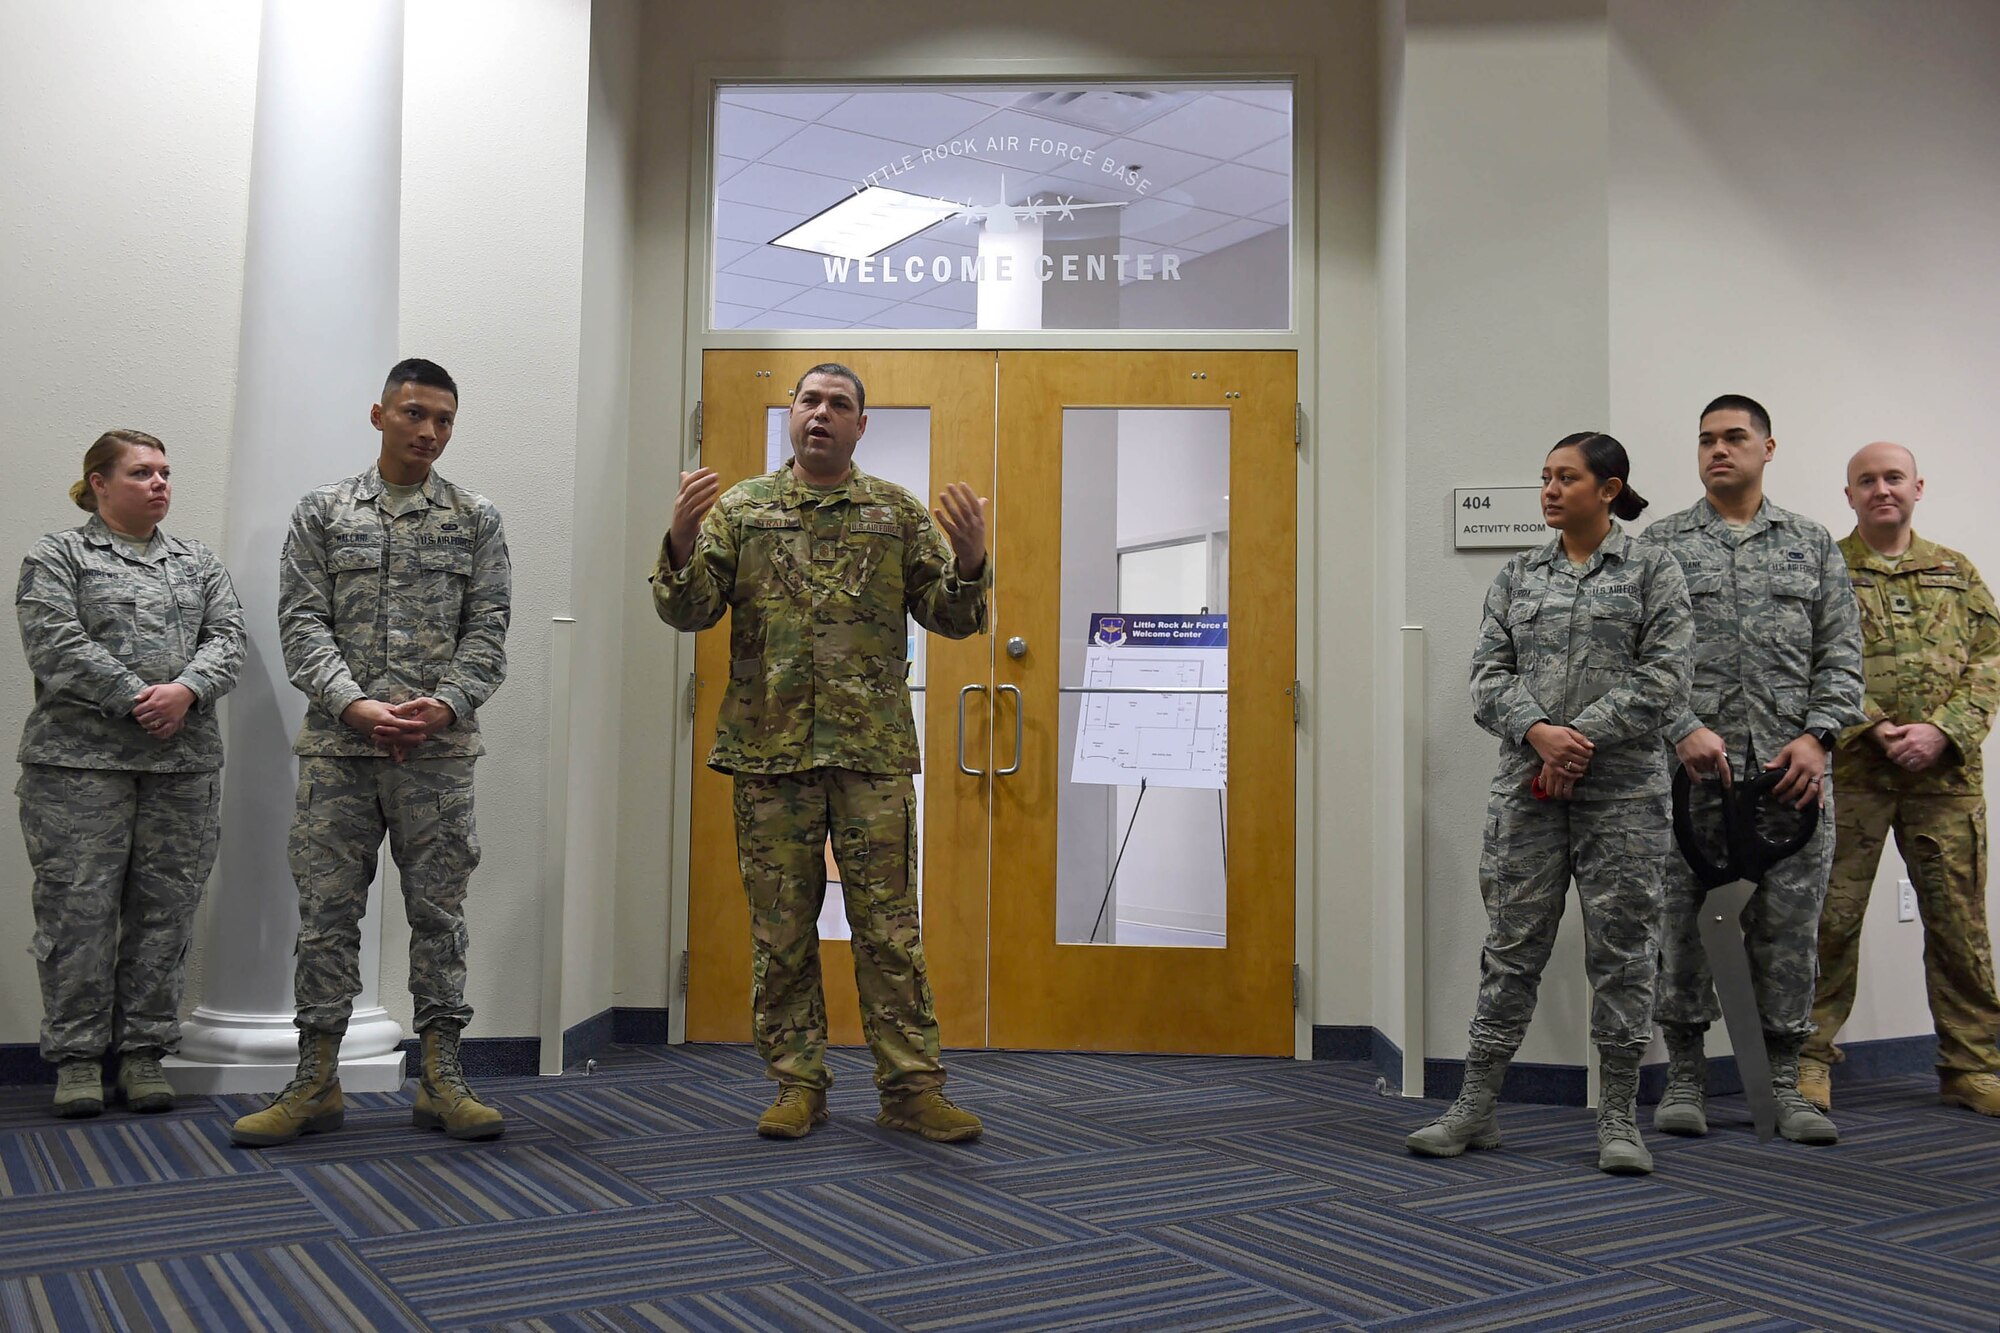 A bunch of Airman stand in front a two doors inside a building